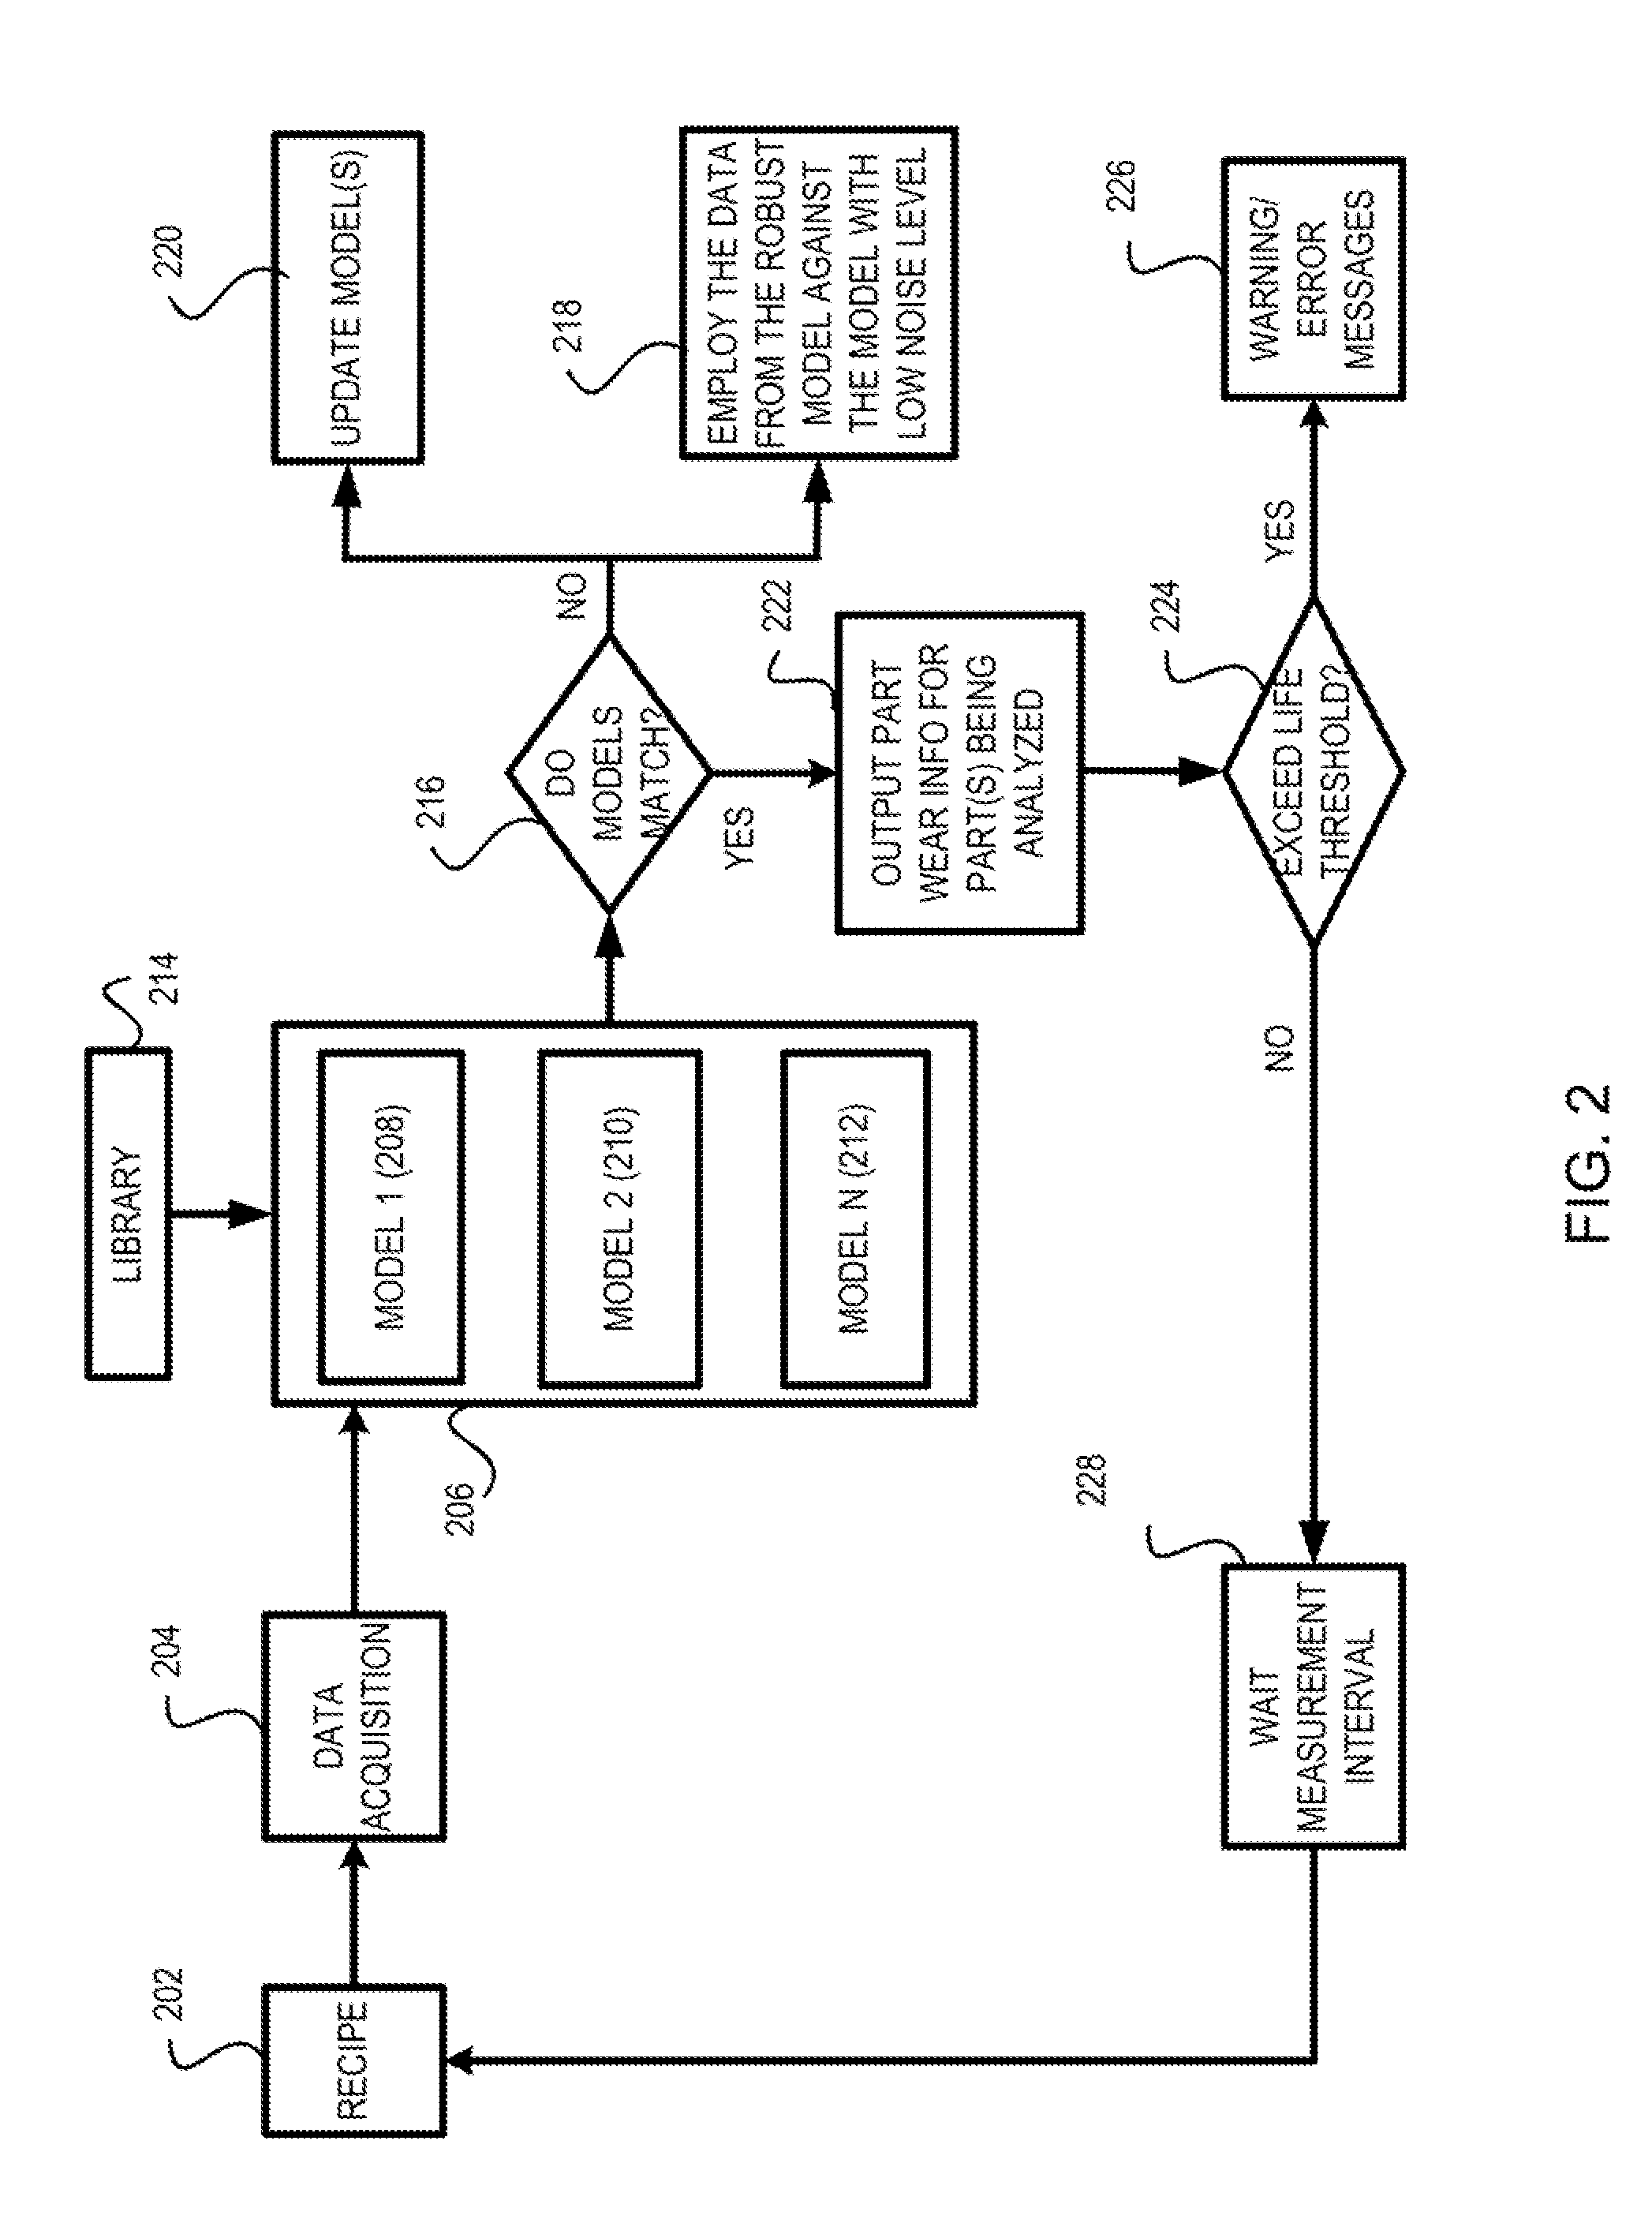 Methods and apparatus for predictive preventive maintenance of processing chambers